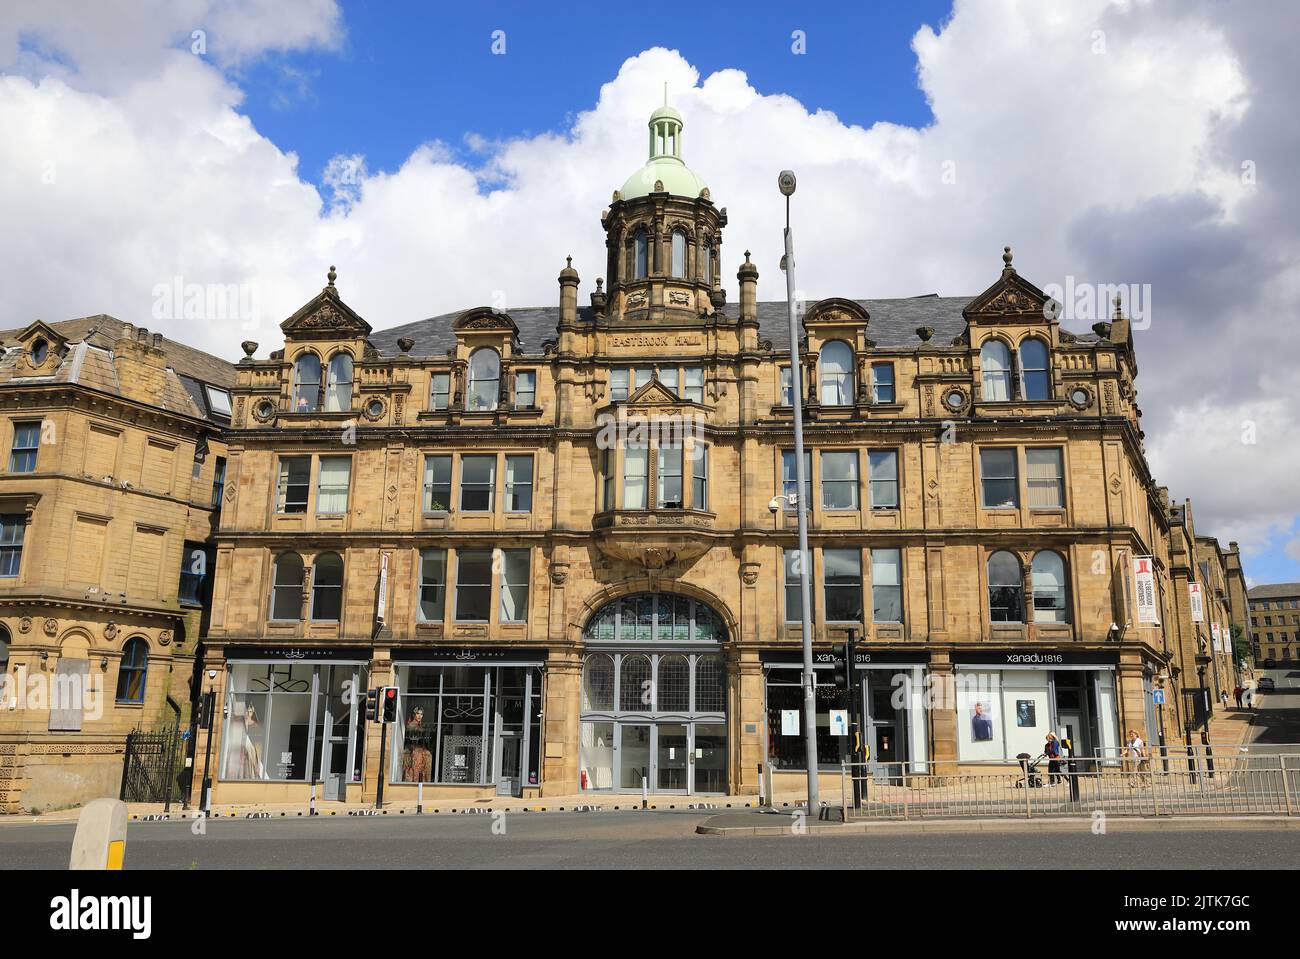 Little Germany, a unique area of the City of Bradford, with many listed buildings, built 1855 and 1890, when the city had a booming wool industry, UK Stock Photo